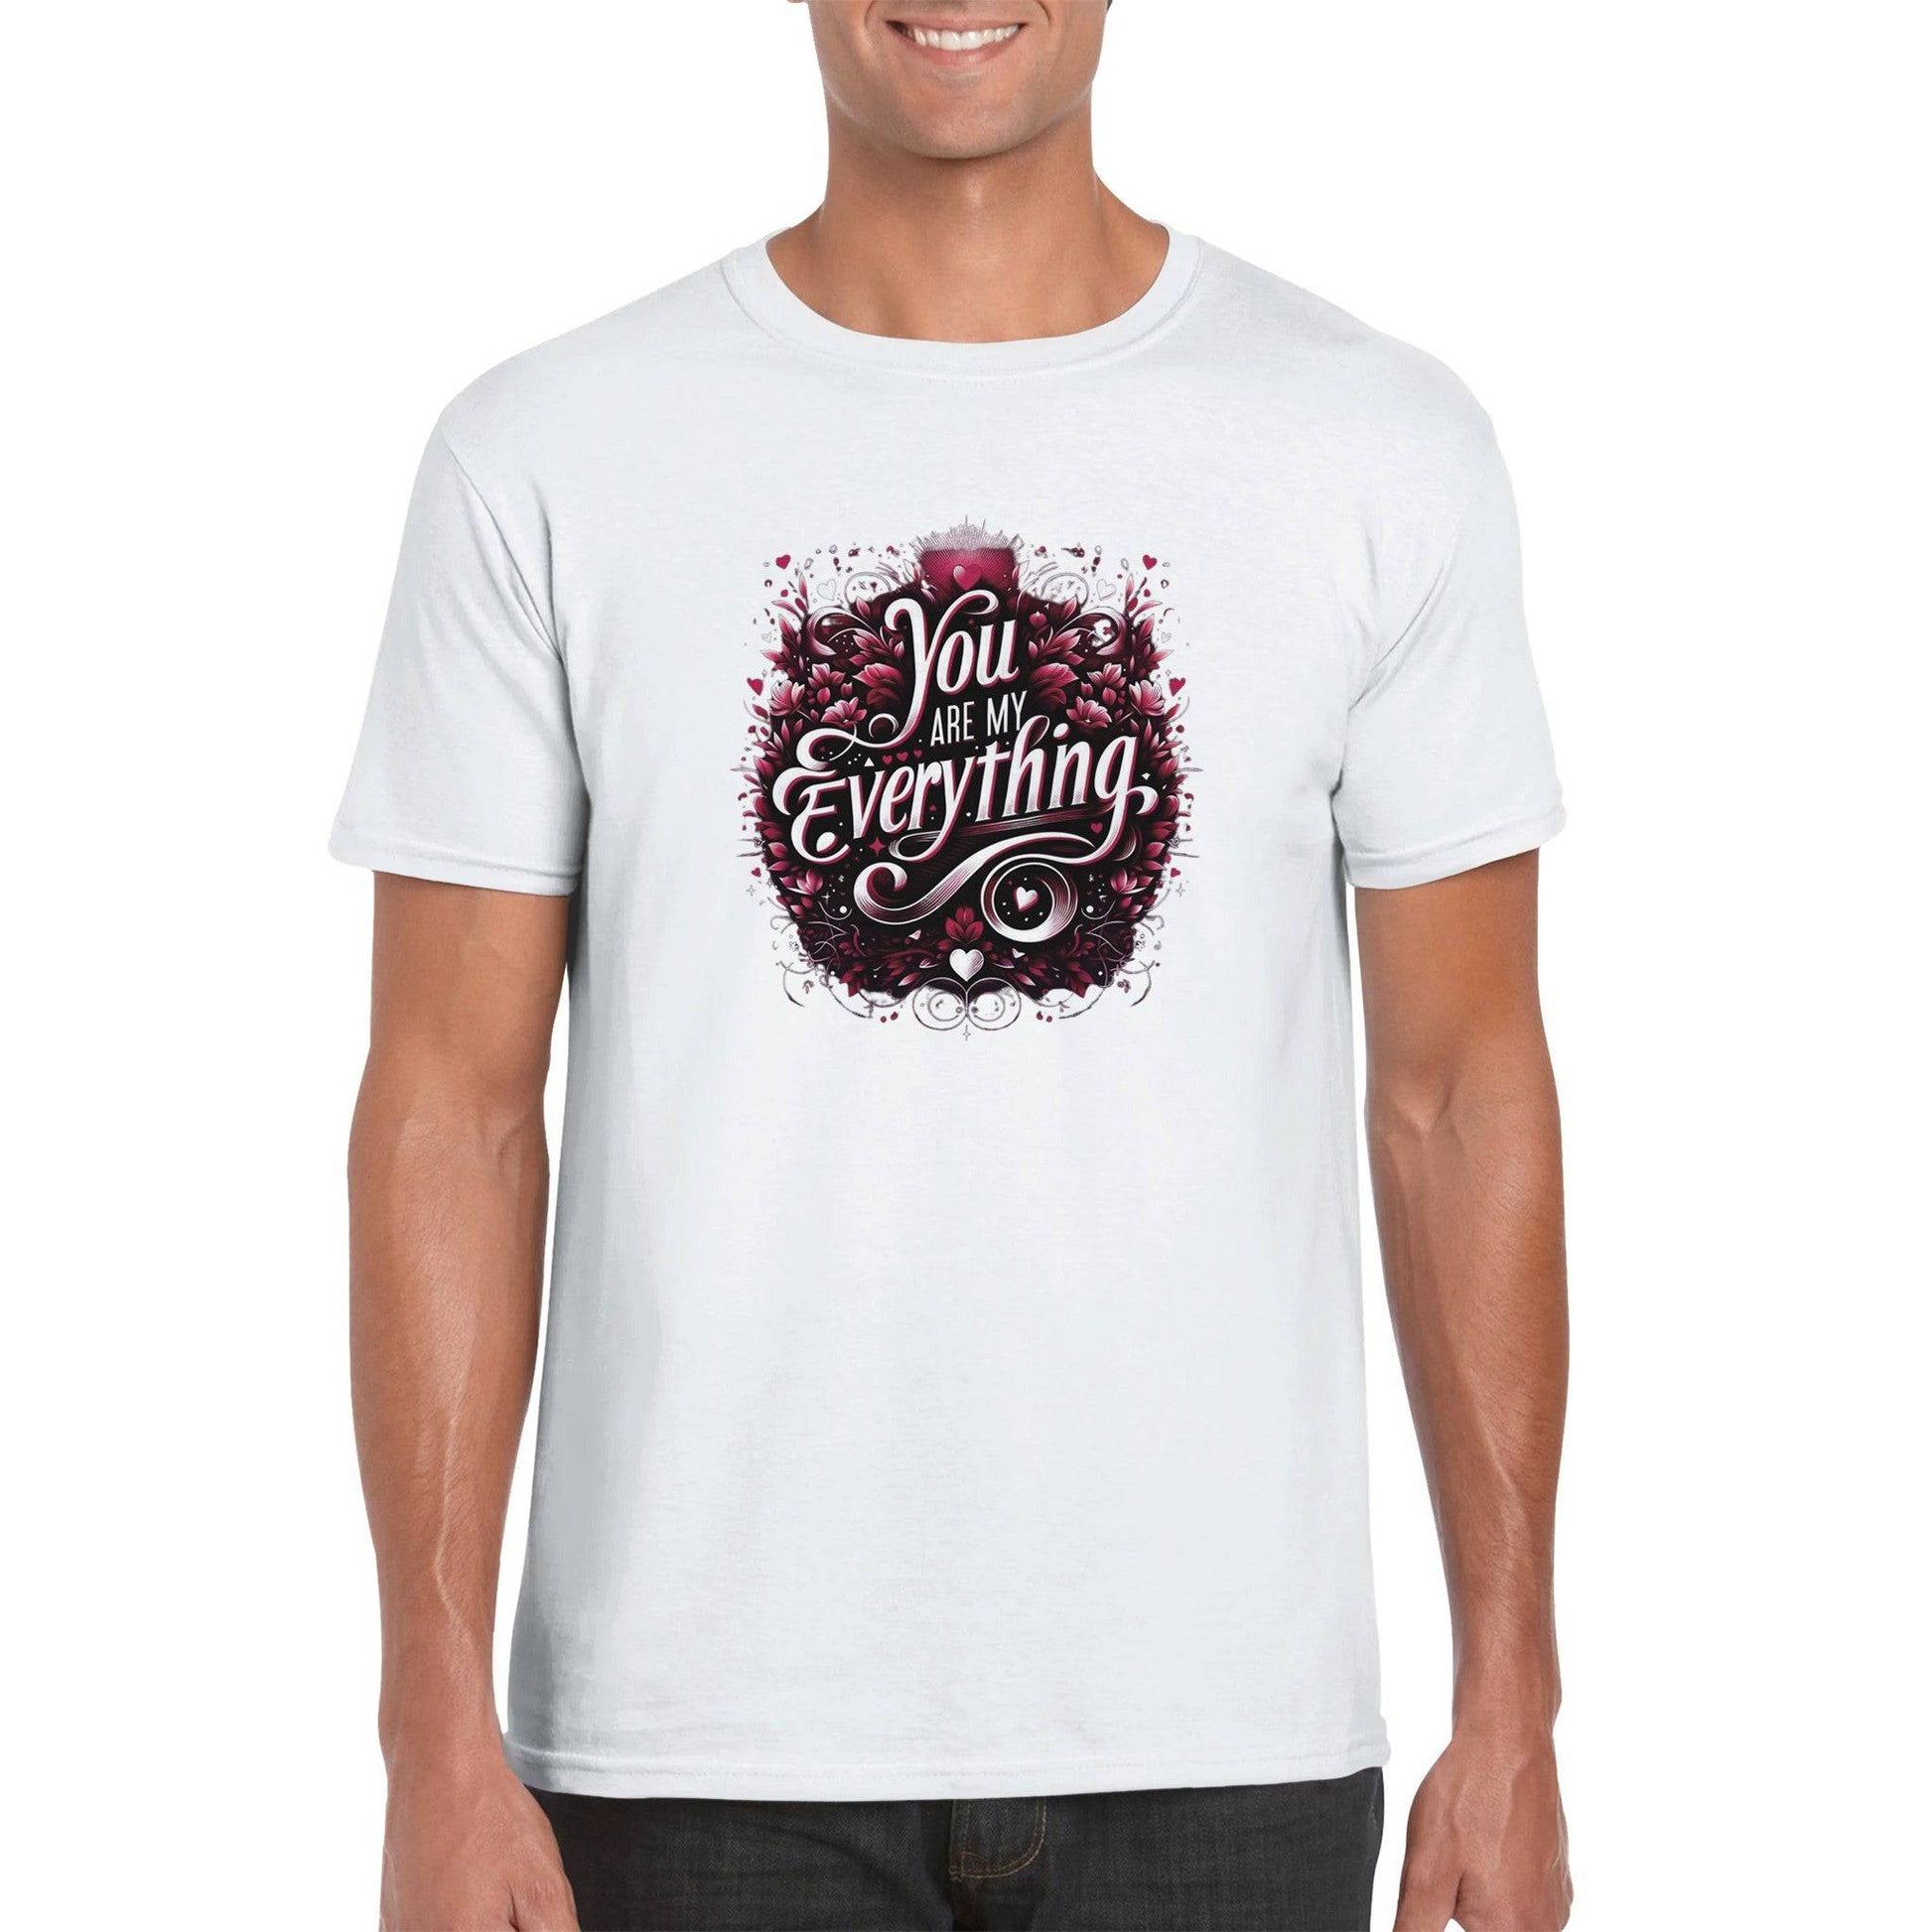 sentiment & heartwarming  "You Are My Everything" T-Shirt - 100% soft, breathable cotton - BeinCart